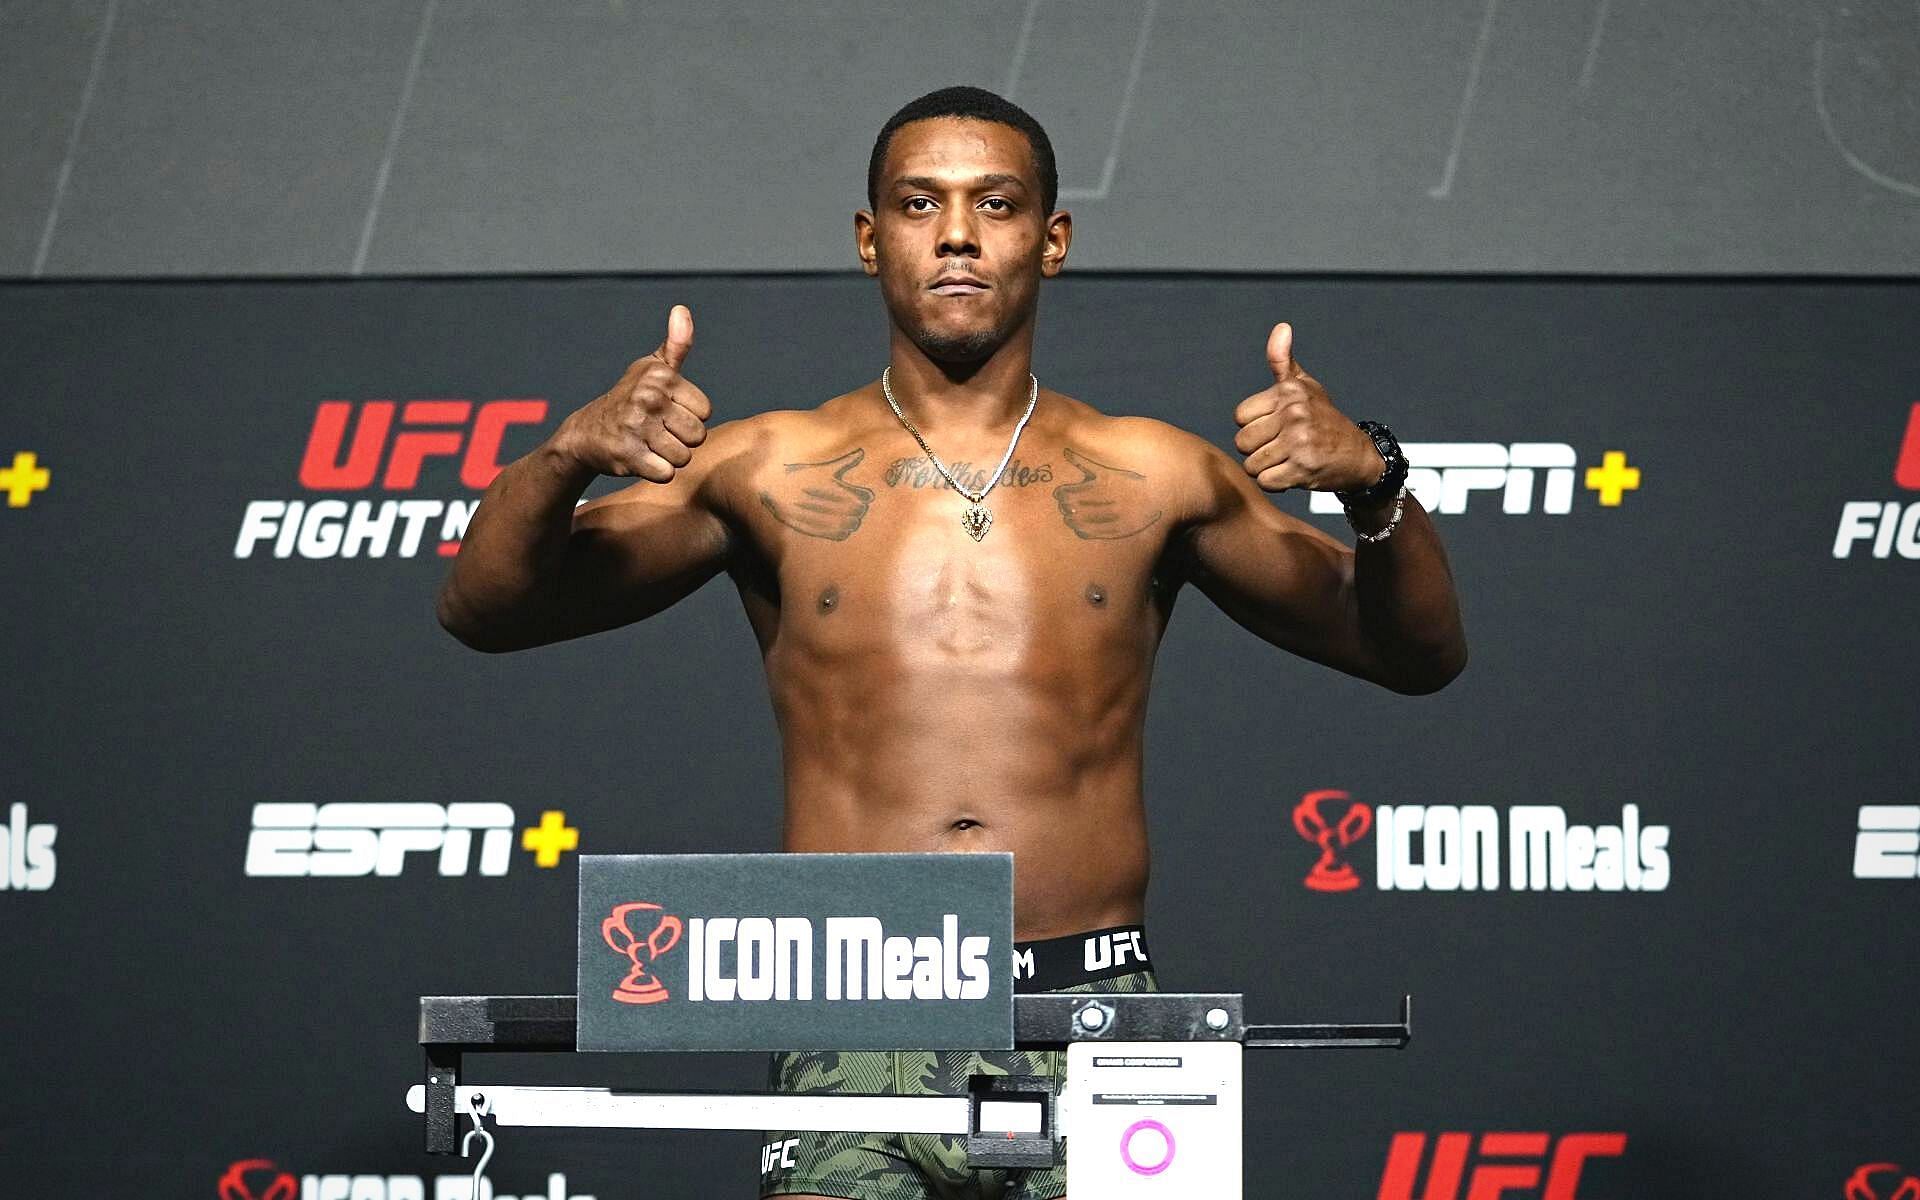 Jamahal Hill poses on the scale during the UFC Fight Night weigh-in at UFC APEX on February 18, 2022 in Las Vegas, Nevada.